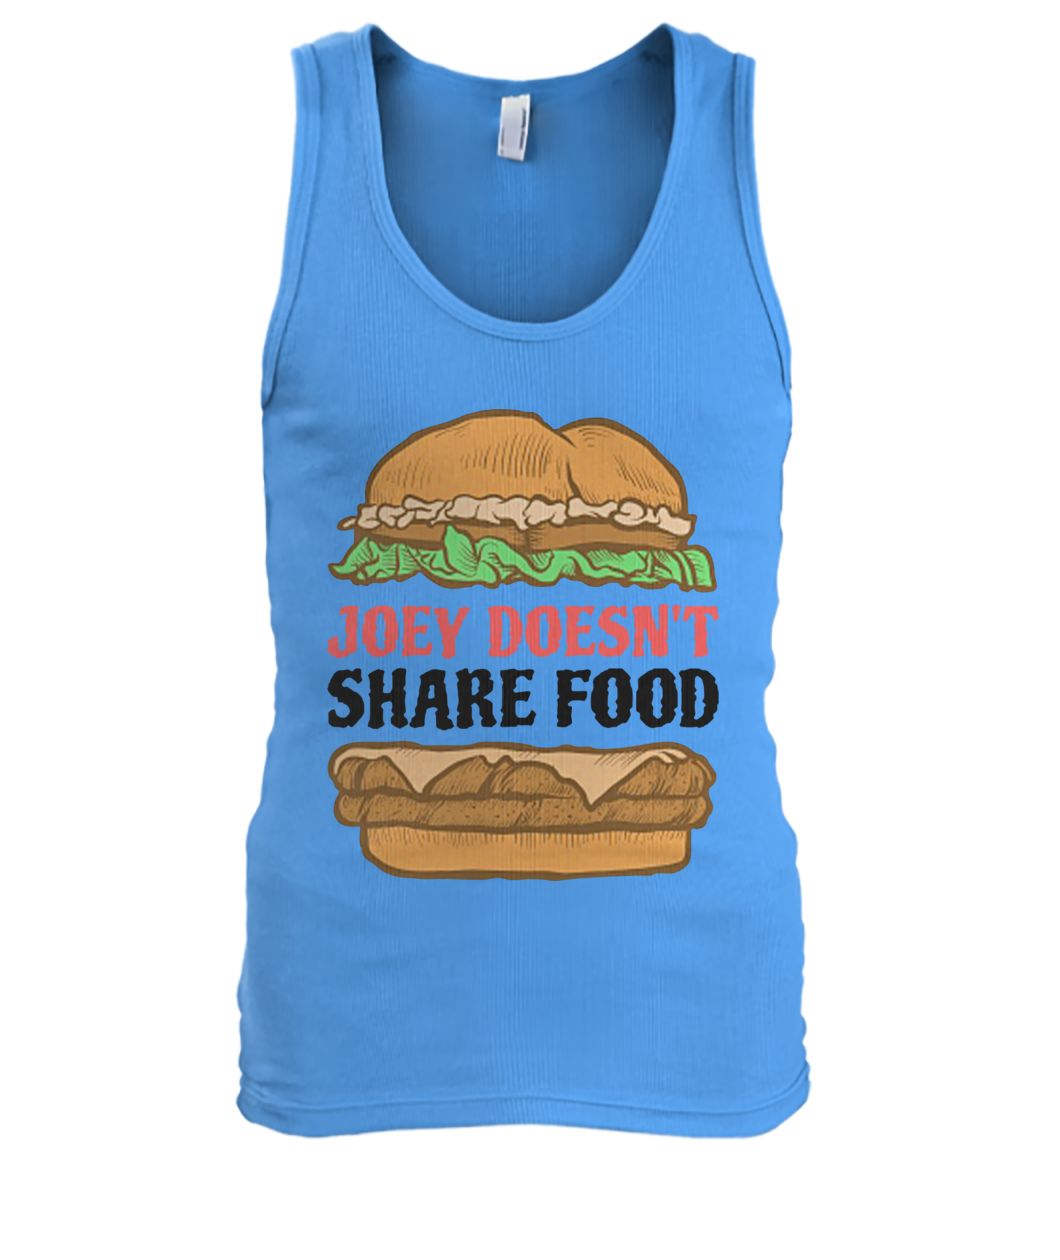 Hambuger joey doesn't share food men's tank top